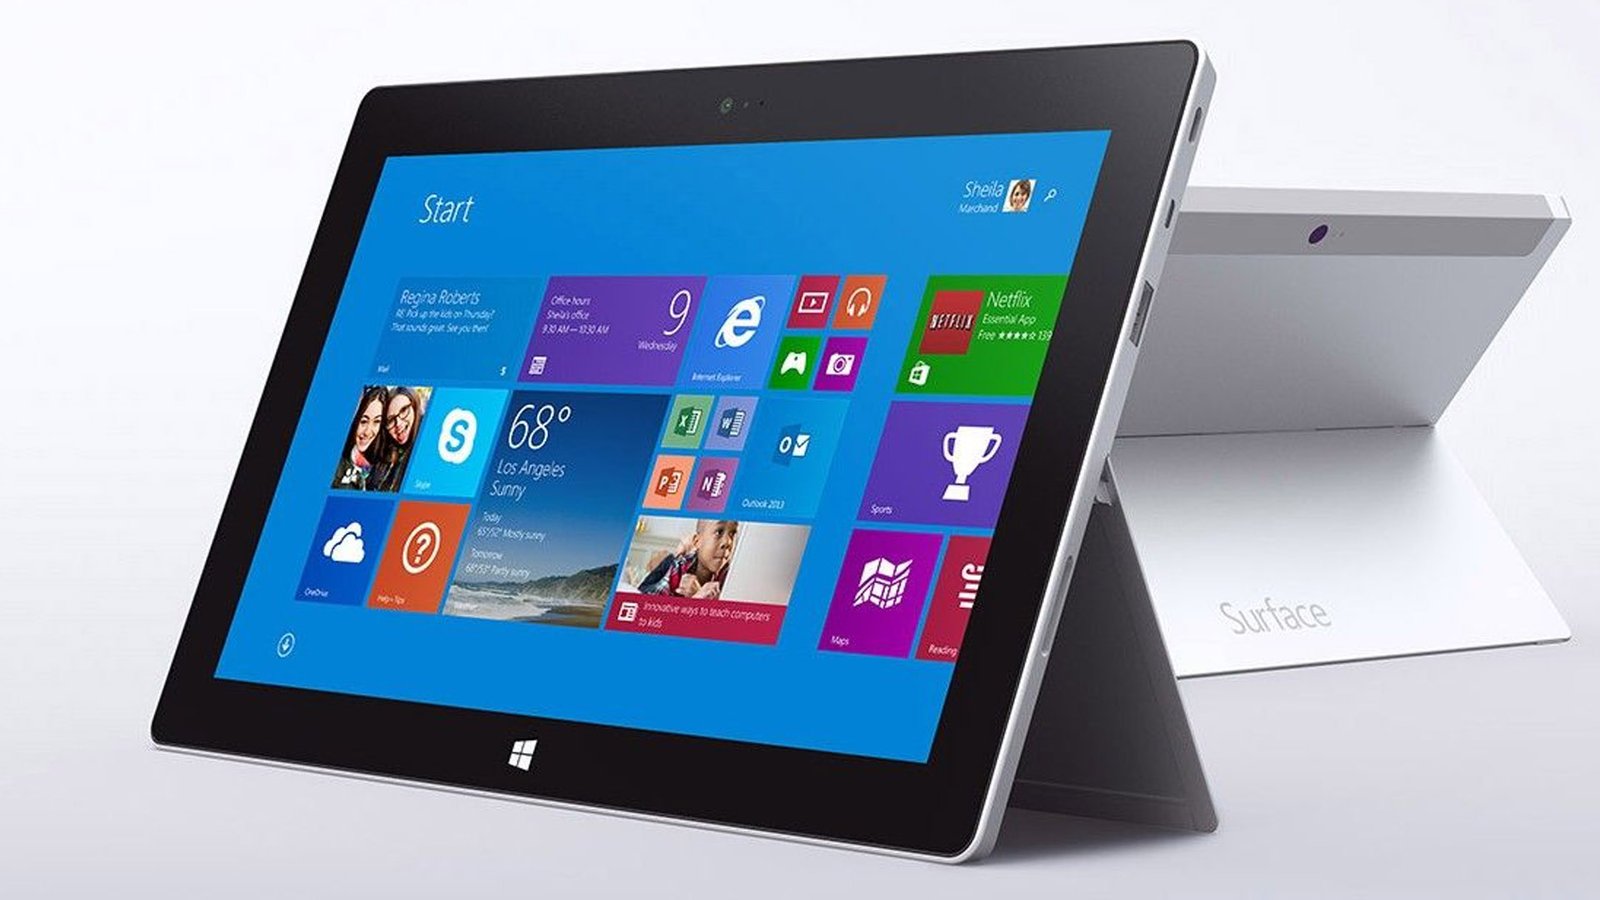 Microsoft is able to leave Dwelling windows 8 in the encourage of, upright love every person else